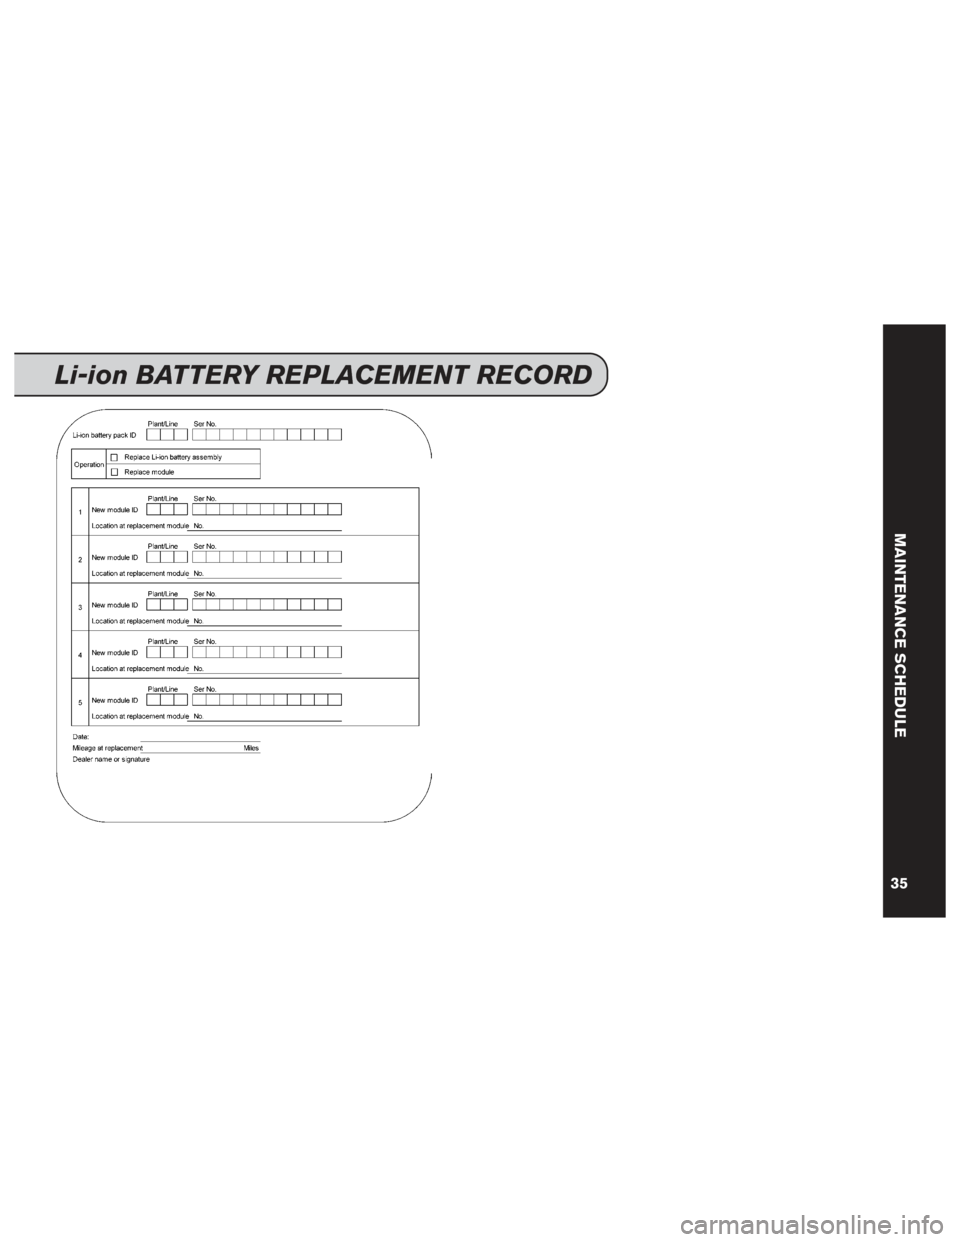 NISSAN LEAF 2016 1.G Service And Maintenance Guide Li-ion BATTERY REPLACEMENT RECORD
35
MAINTENANCE SCHEDULE 